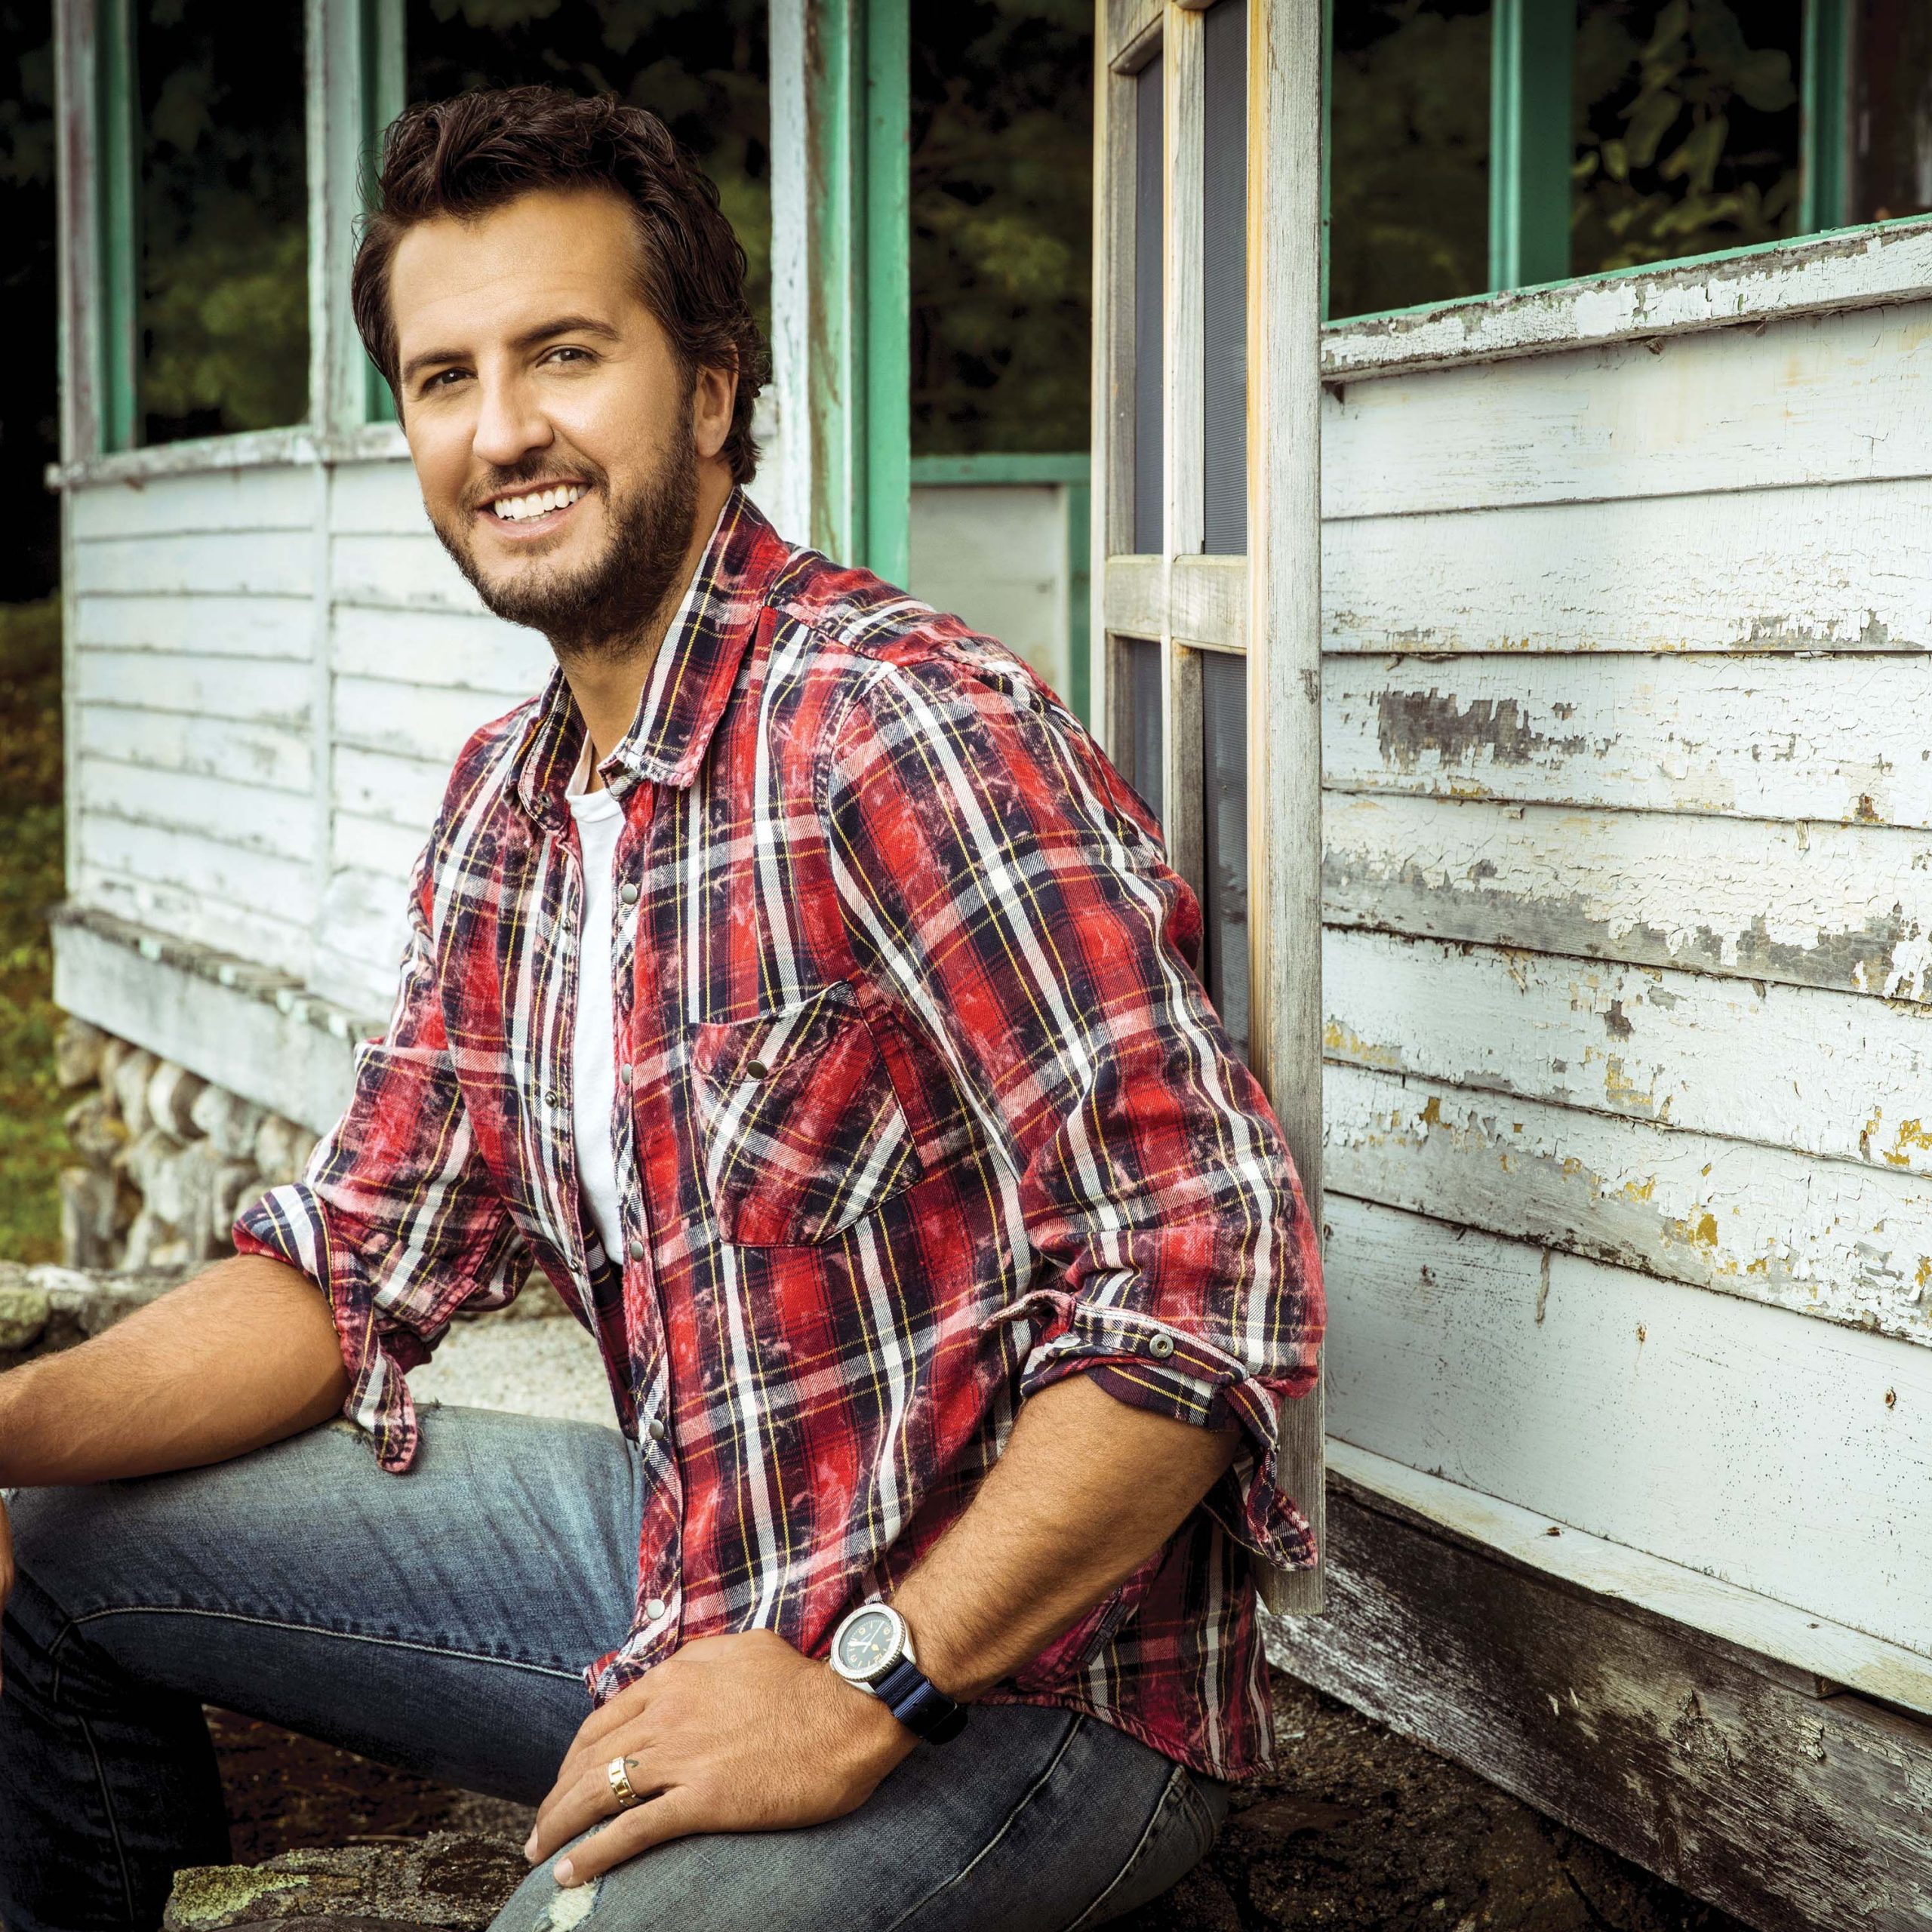 Luke Bryan Kicked Off Summer with Back-To-Back Stadium Shows Hitting 100,000 Fans in Two Countries